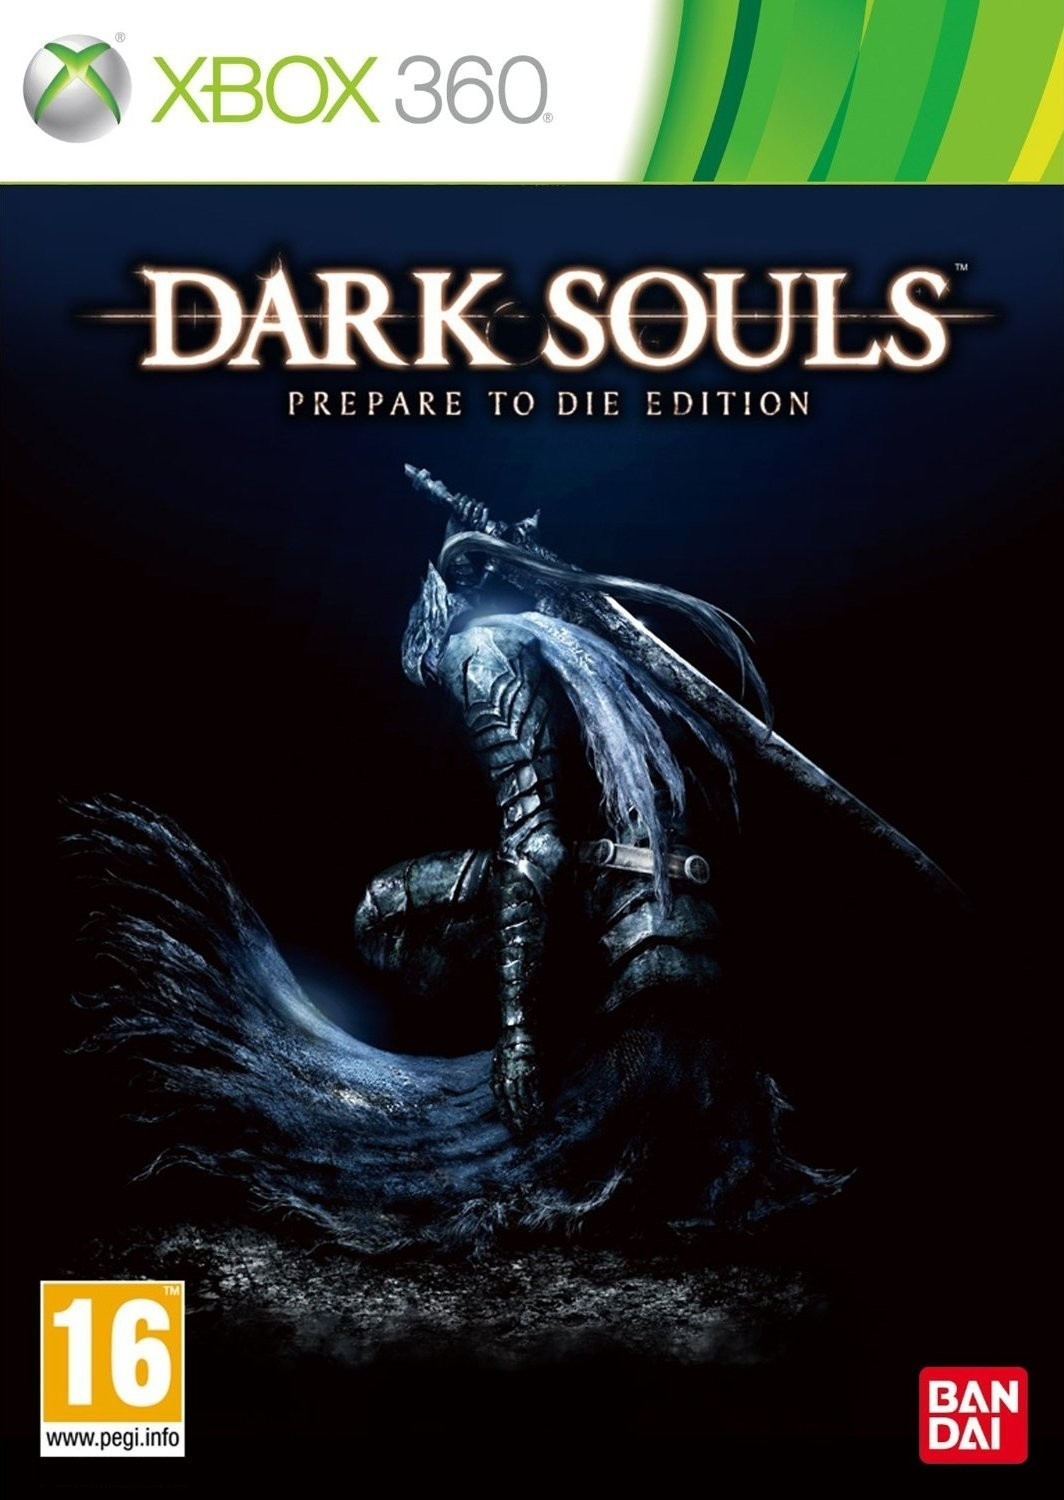 buy-dark-souls-prepare-to-die-edition-xbox-360-from-24-99-today